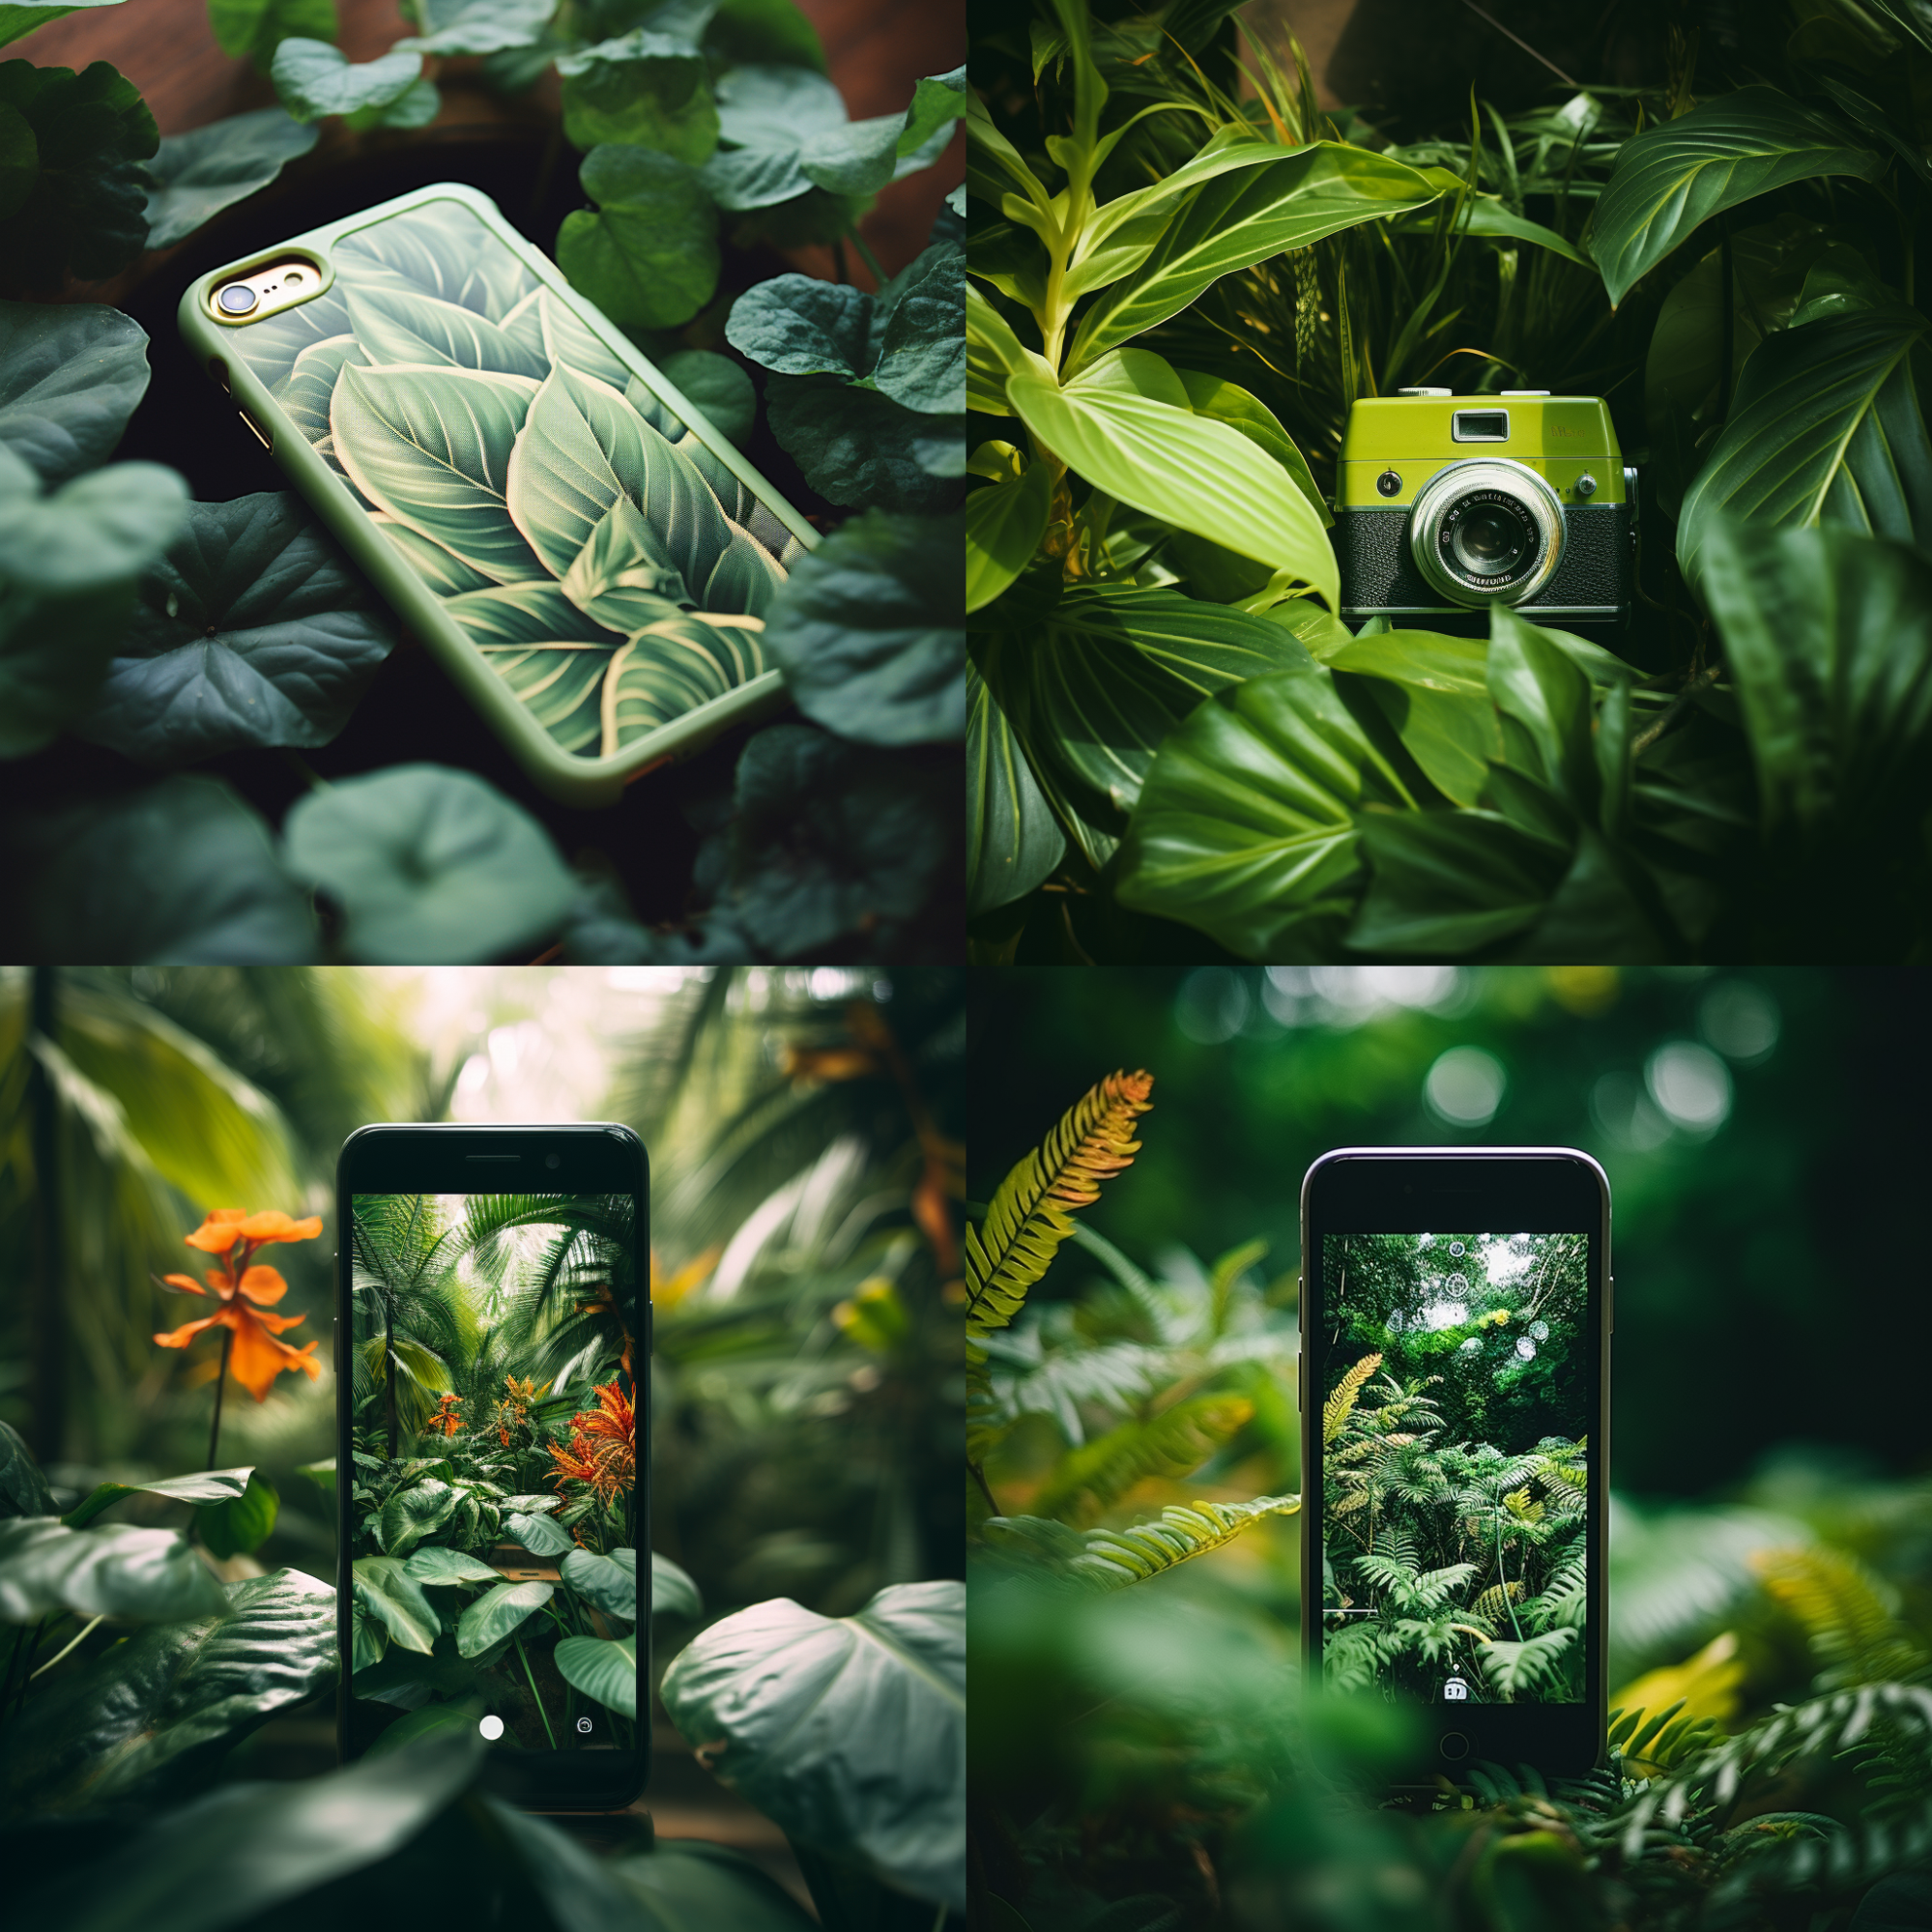 Four image options generated by Midjourney based on a plant lover's paradise prompt